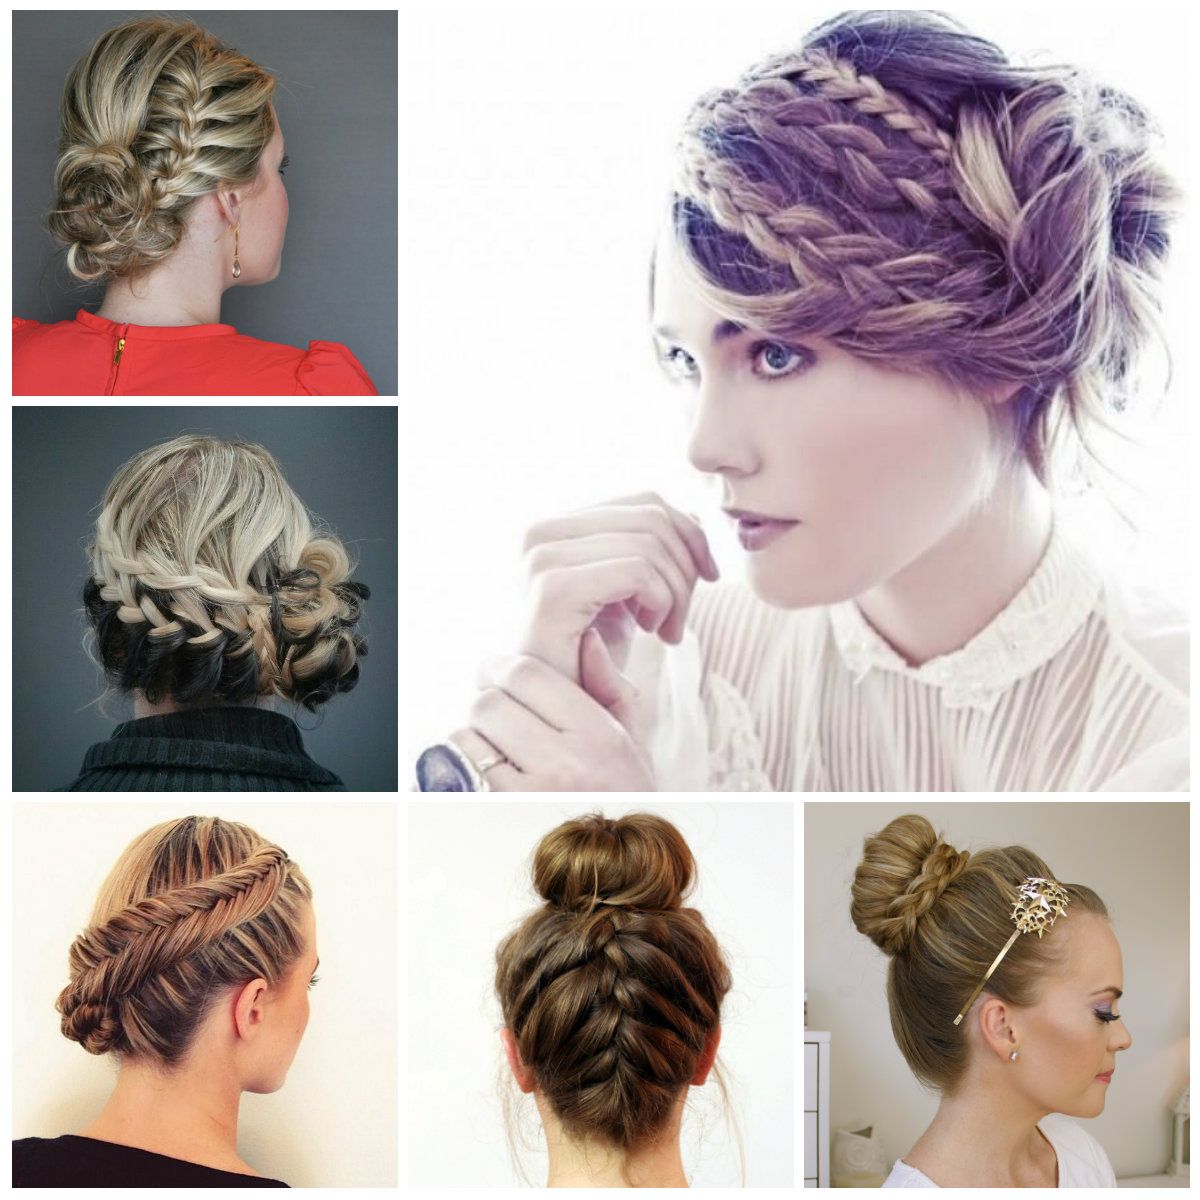 2020 Multi Braid Updo Hairstyles Inside Coolest Braided Updo Hairstyles  (View 6 of 20)